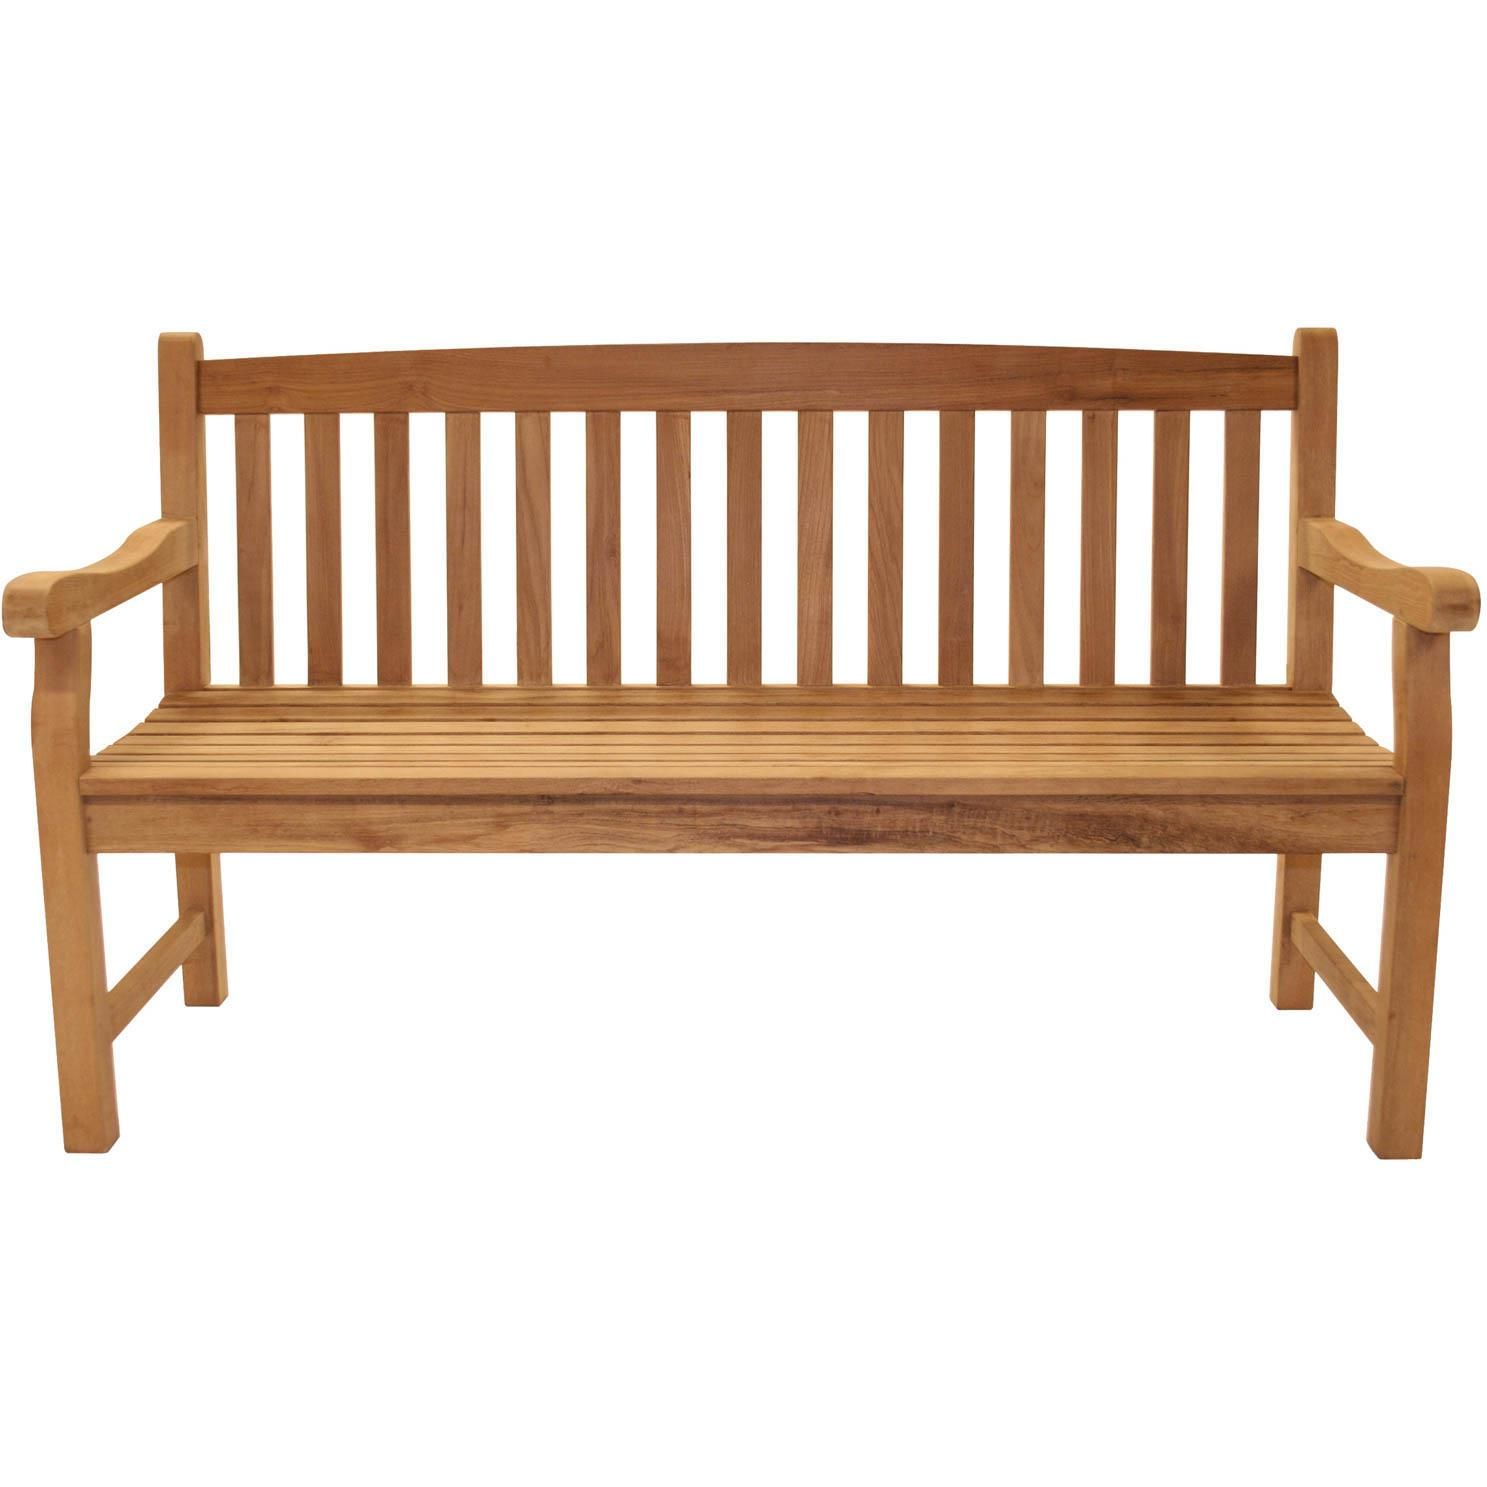 Royal Teak Collection Classic 63 Inch Teak Patio Bench For Teak Glider Benches (View 15 of 25)